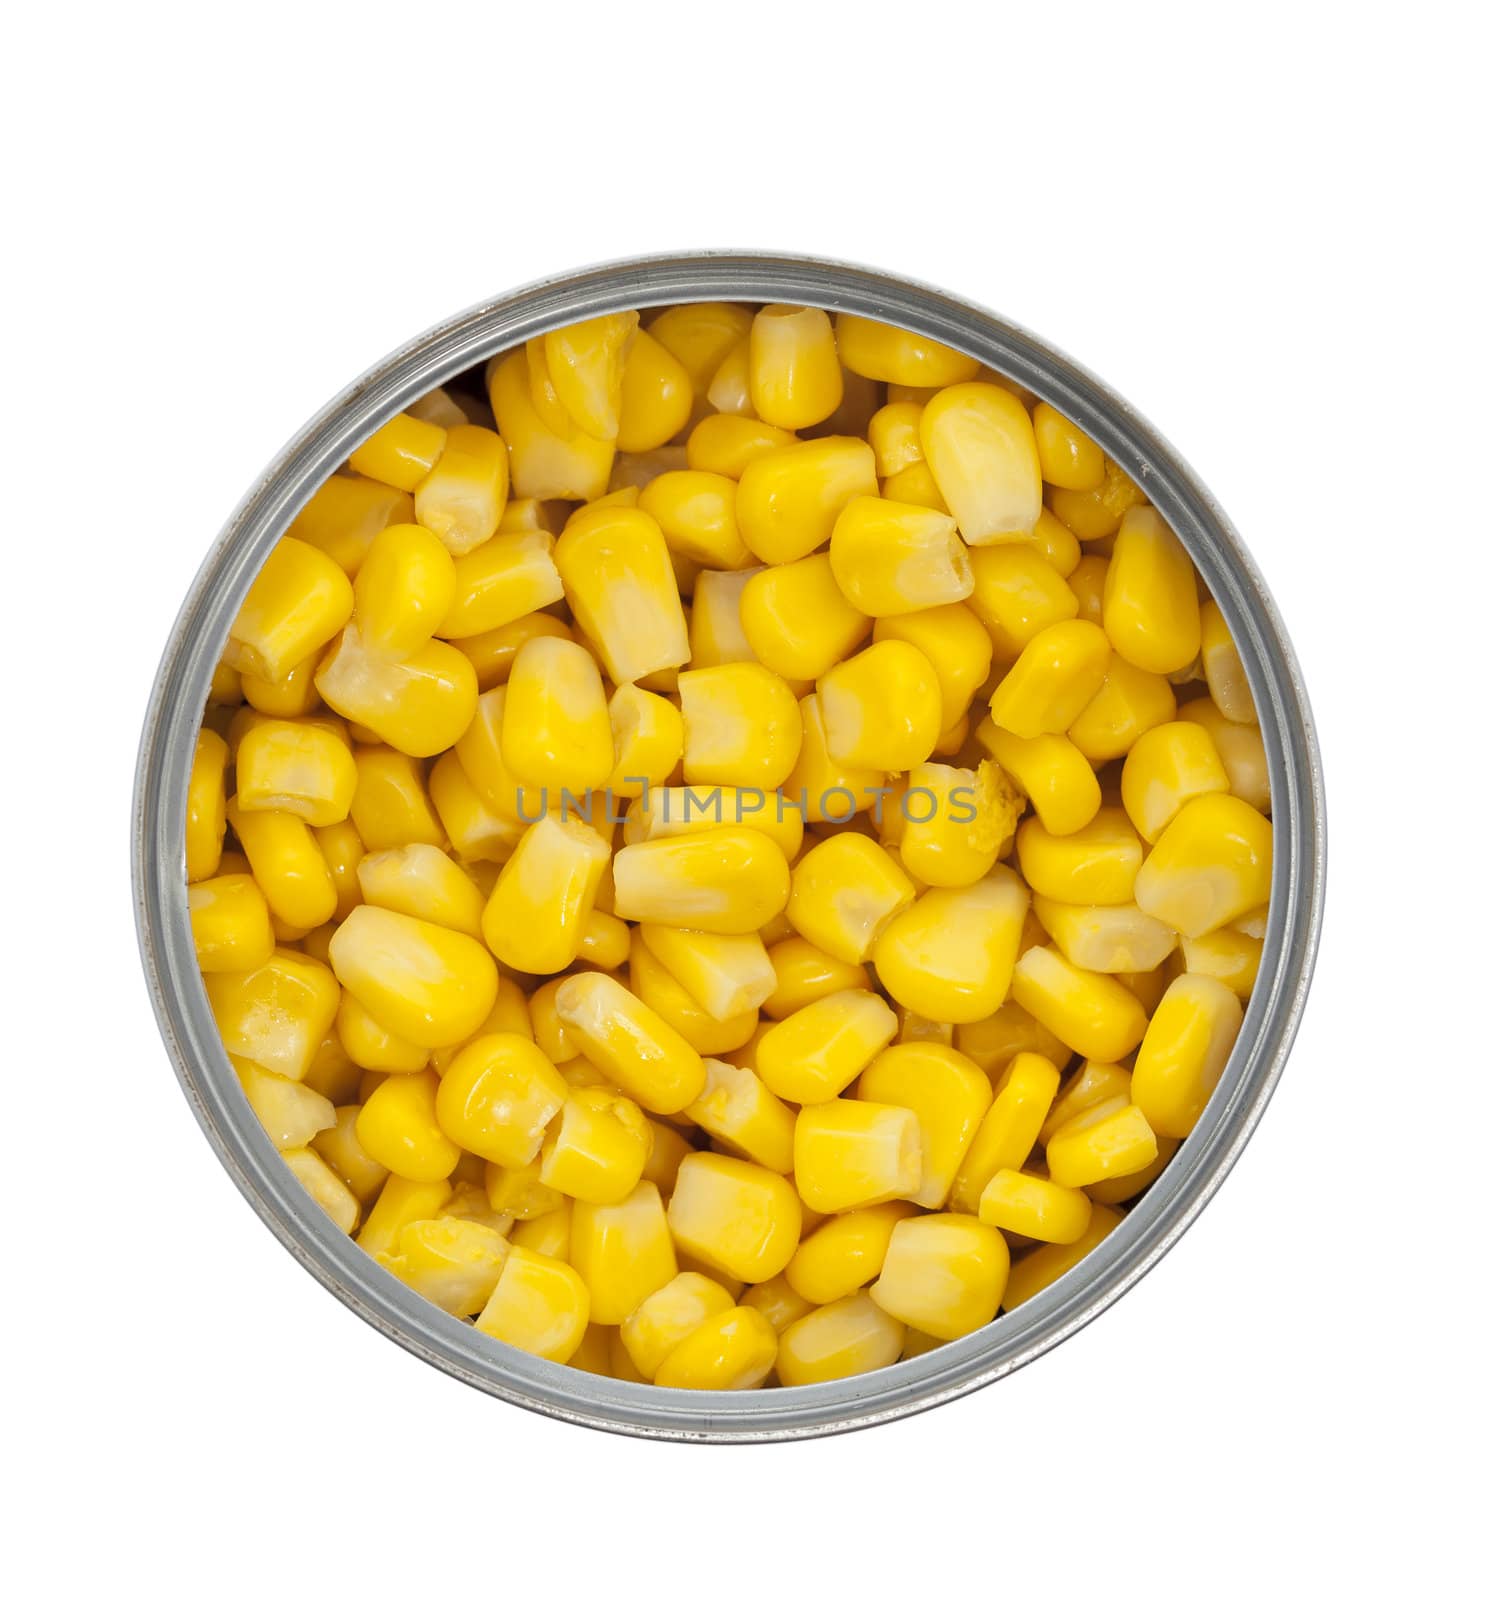 Can of sweet corn from directly above, isolated on a white background.